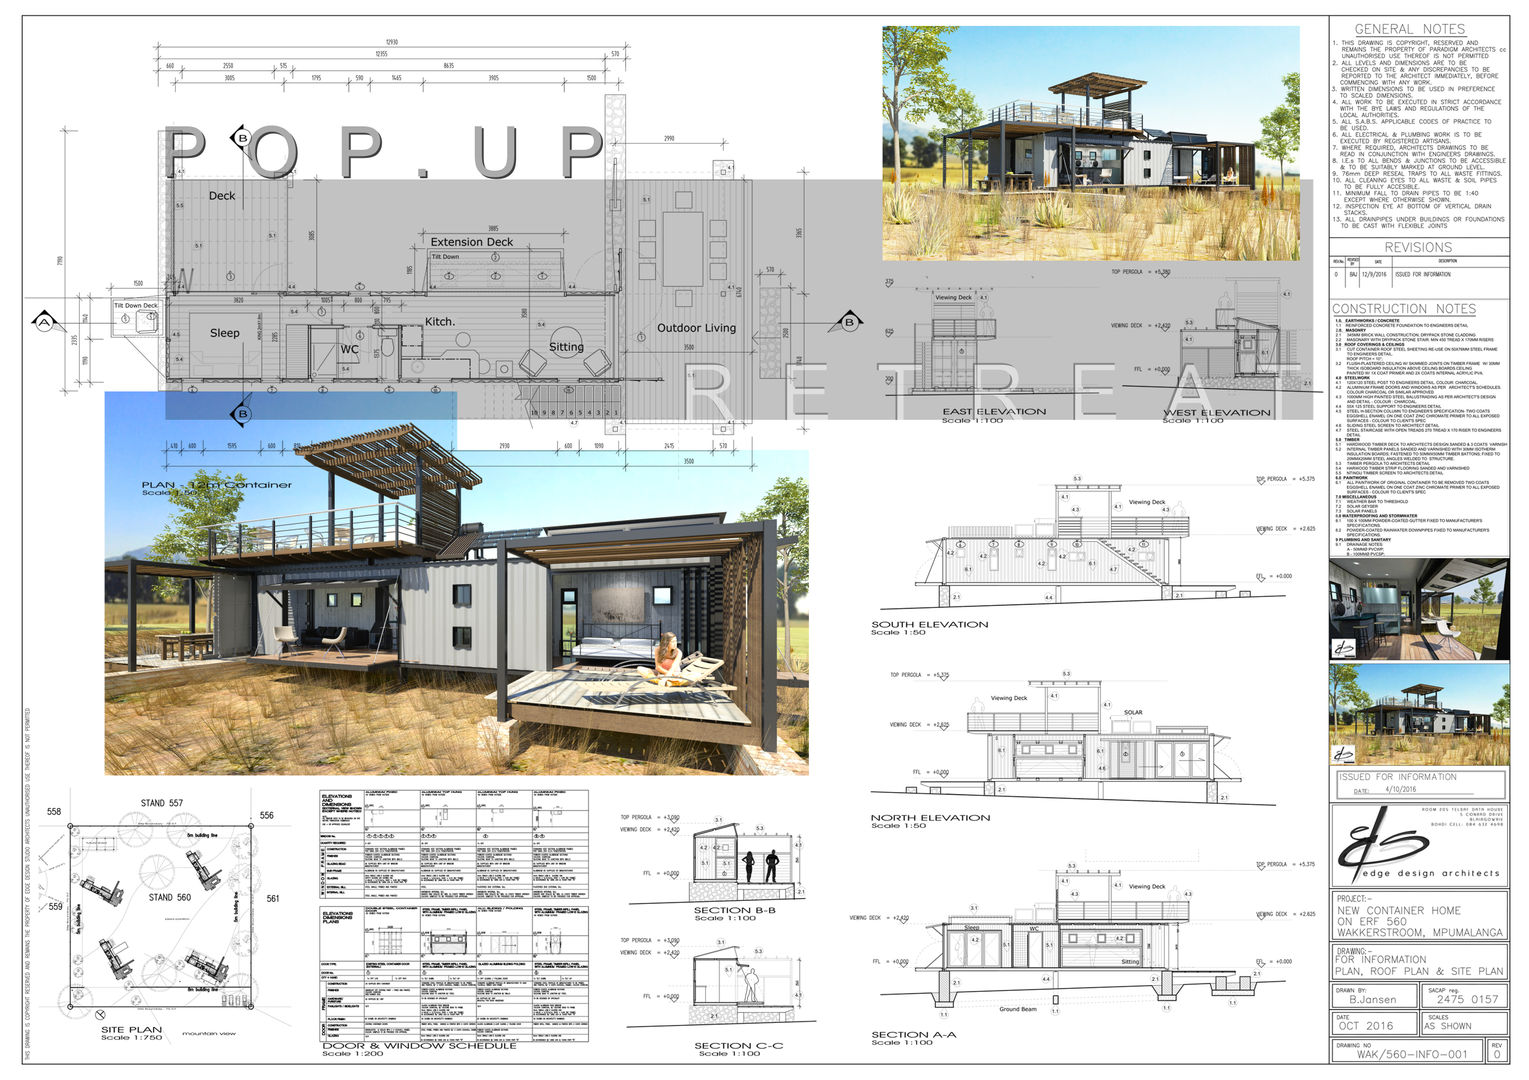 Pop Up retreat - Shipping Container living, Edge Design Studio Architects Edge Design Studio Architects 인더스트리얼 주택